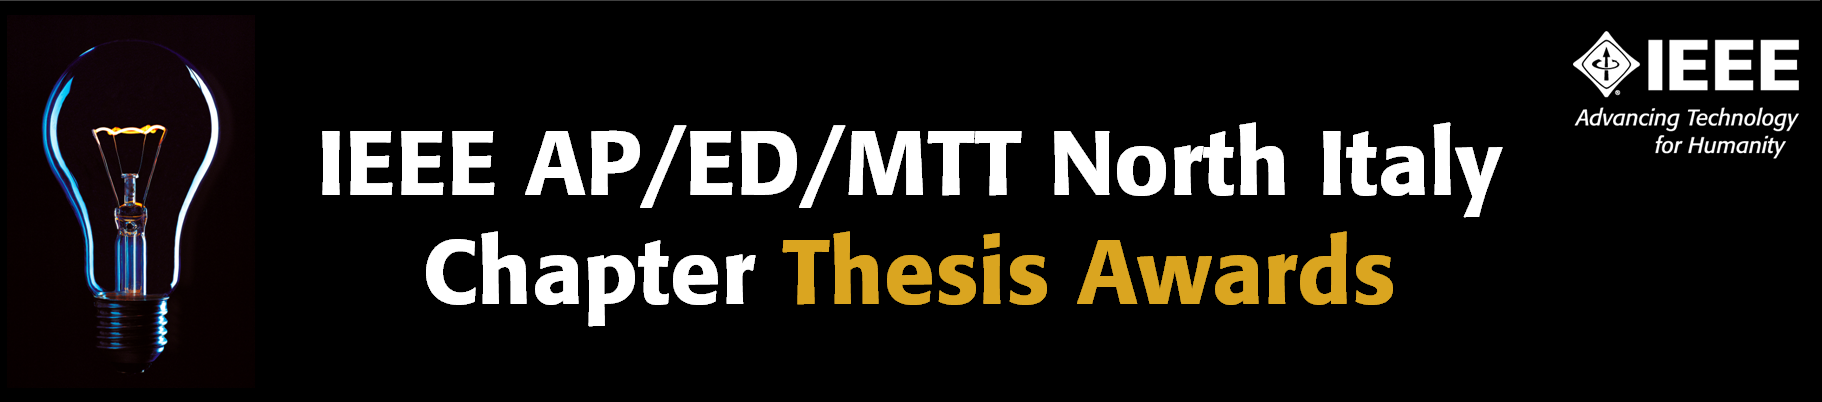 IEEE AP/ED/MTT North Italy Chapter Thesis Awards Announced